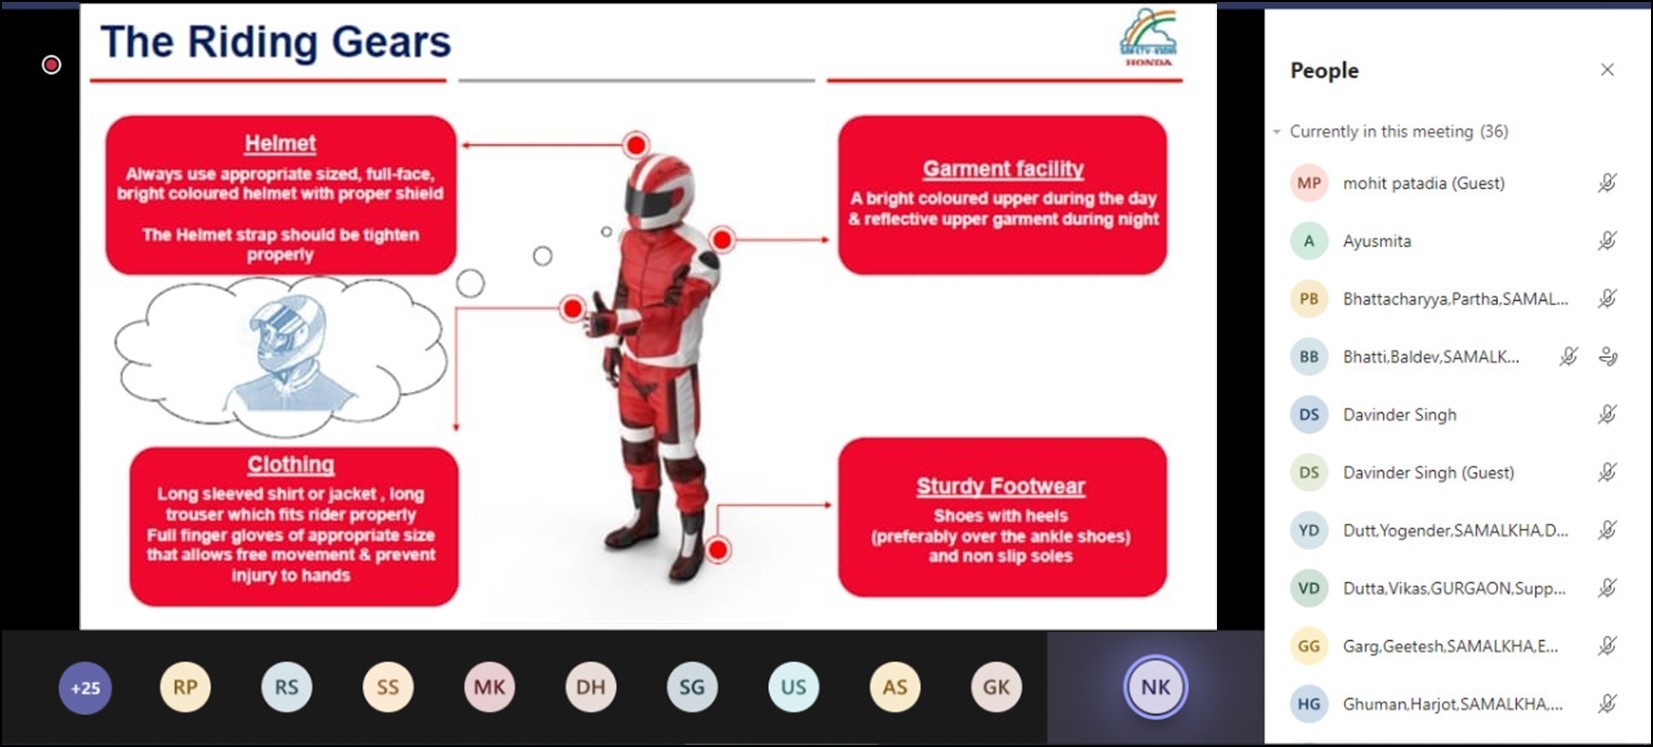 Honda Wheelers India digitally spreads road safety awareness to  Lac people